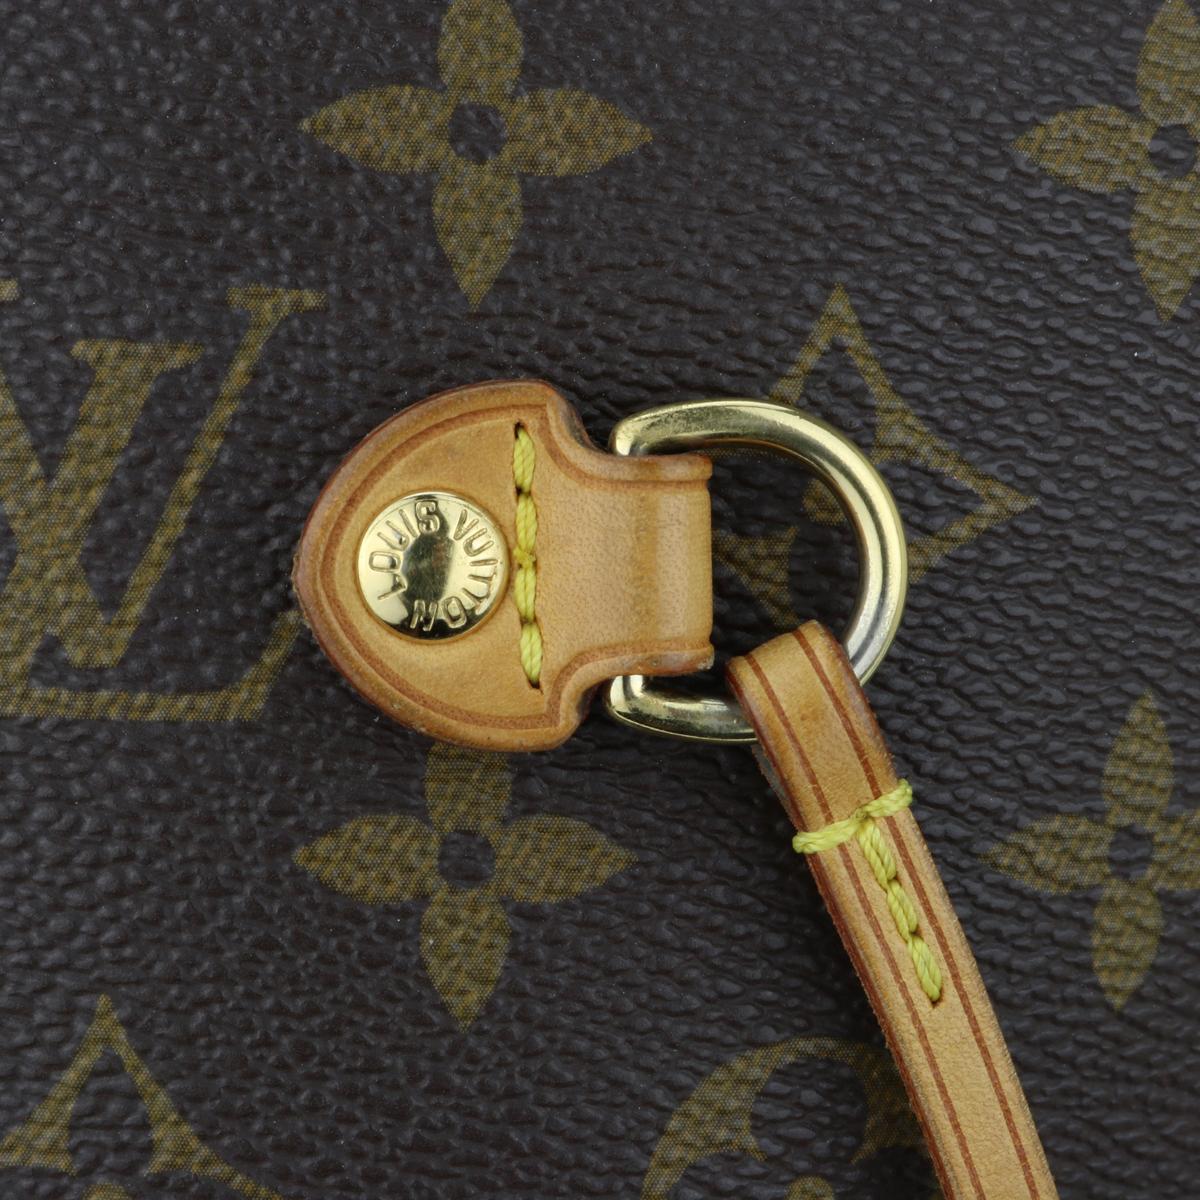 Louis Vuitton Neverfull GM Bag in Monogram with Beige Interior 2008 1